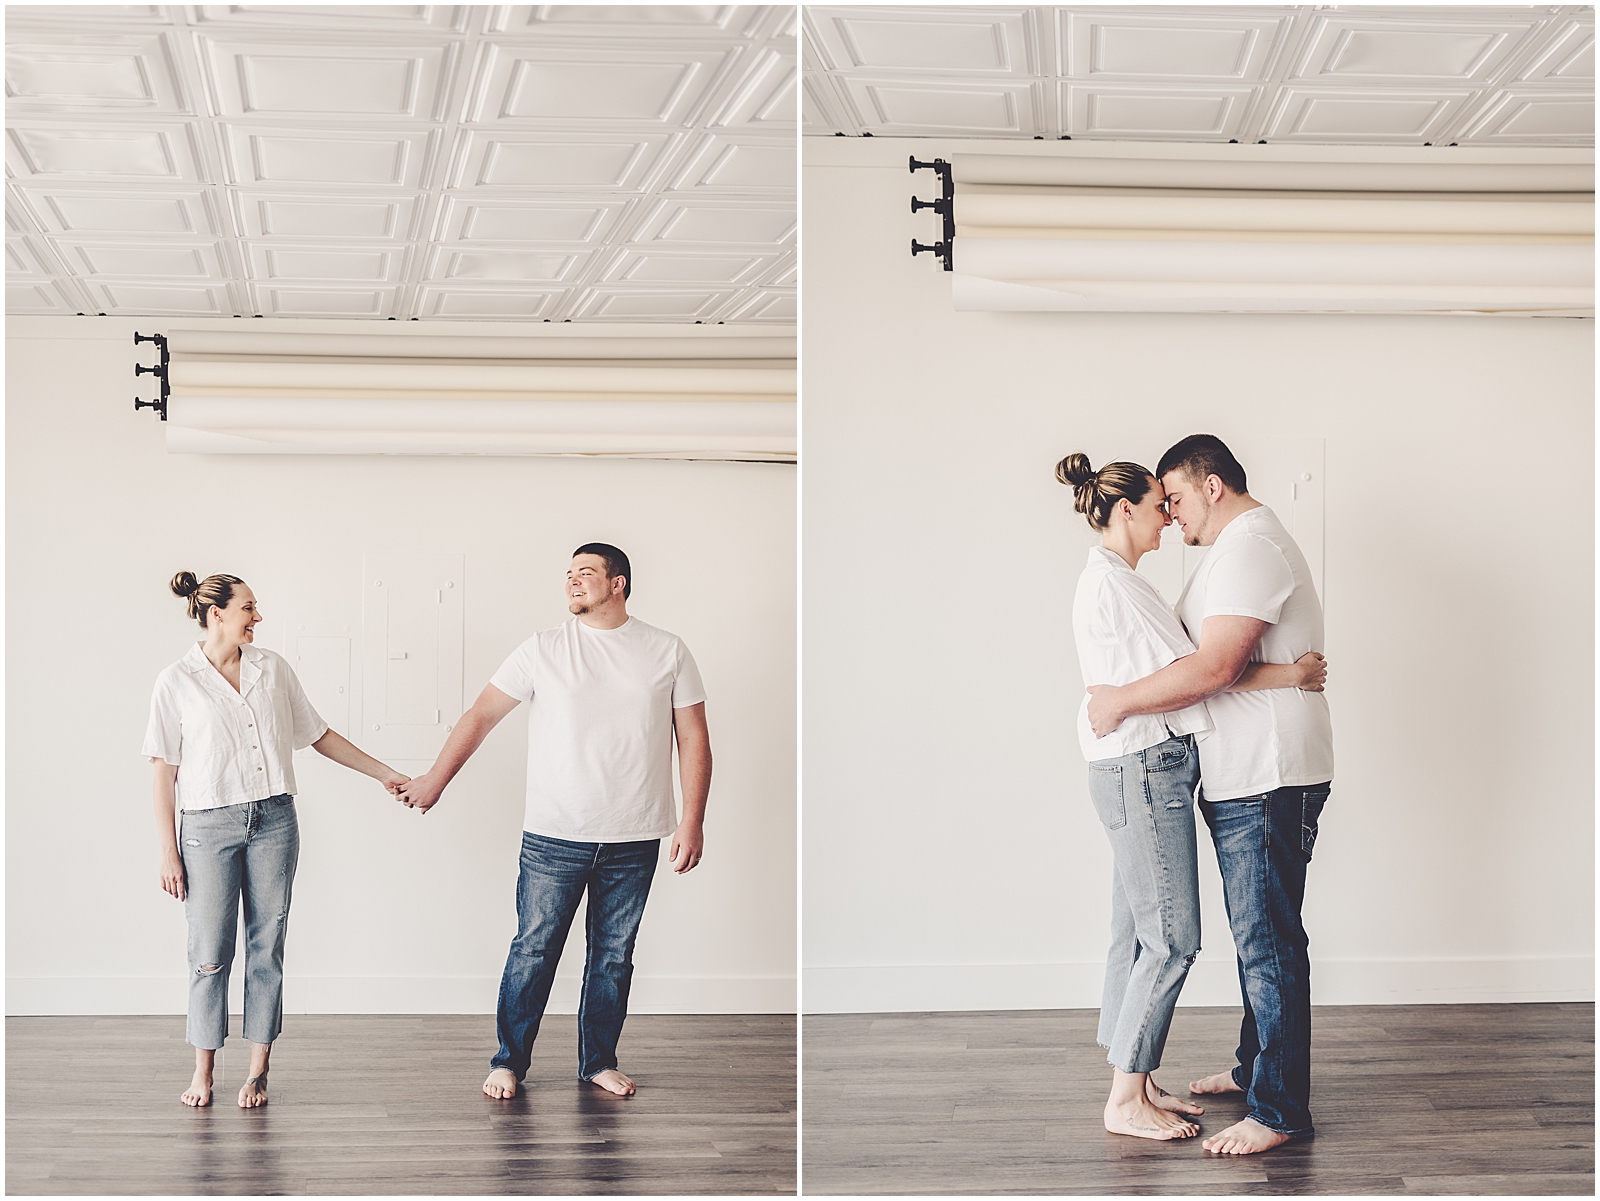 Holly and Kolton's studio couples photo session in Kankakee at natural light Studio 388 with Kara Evans Photographer.